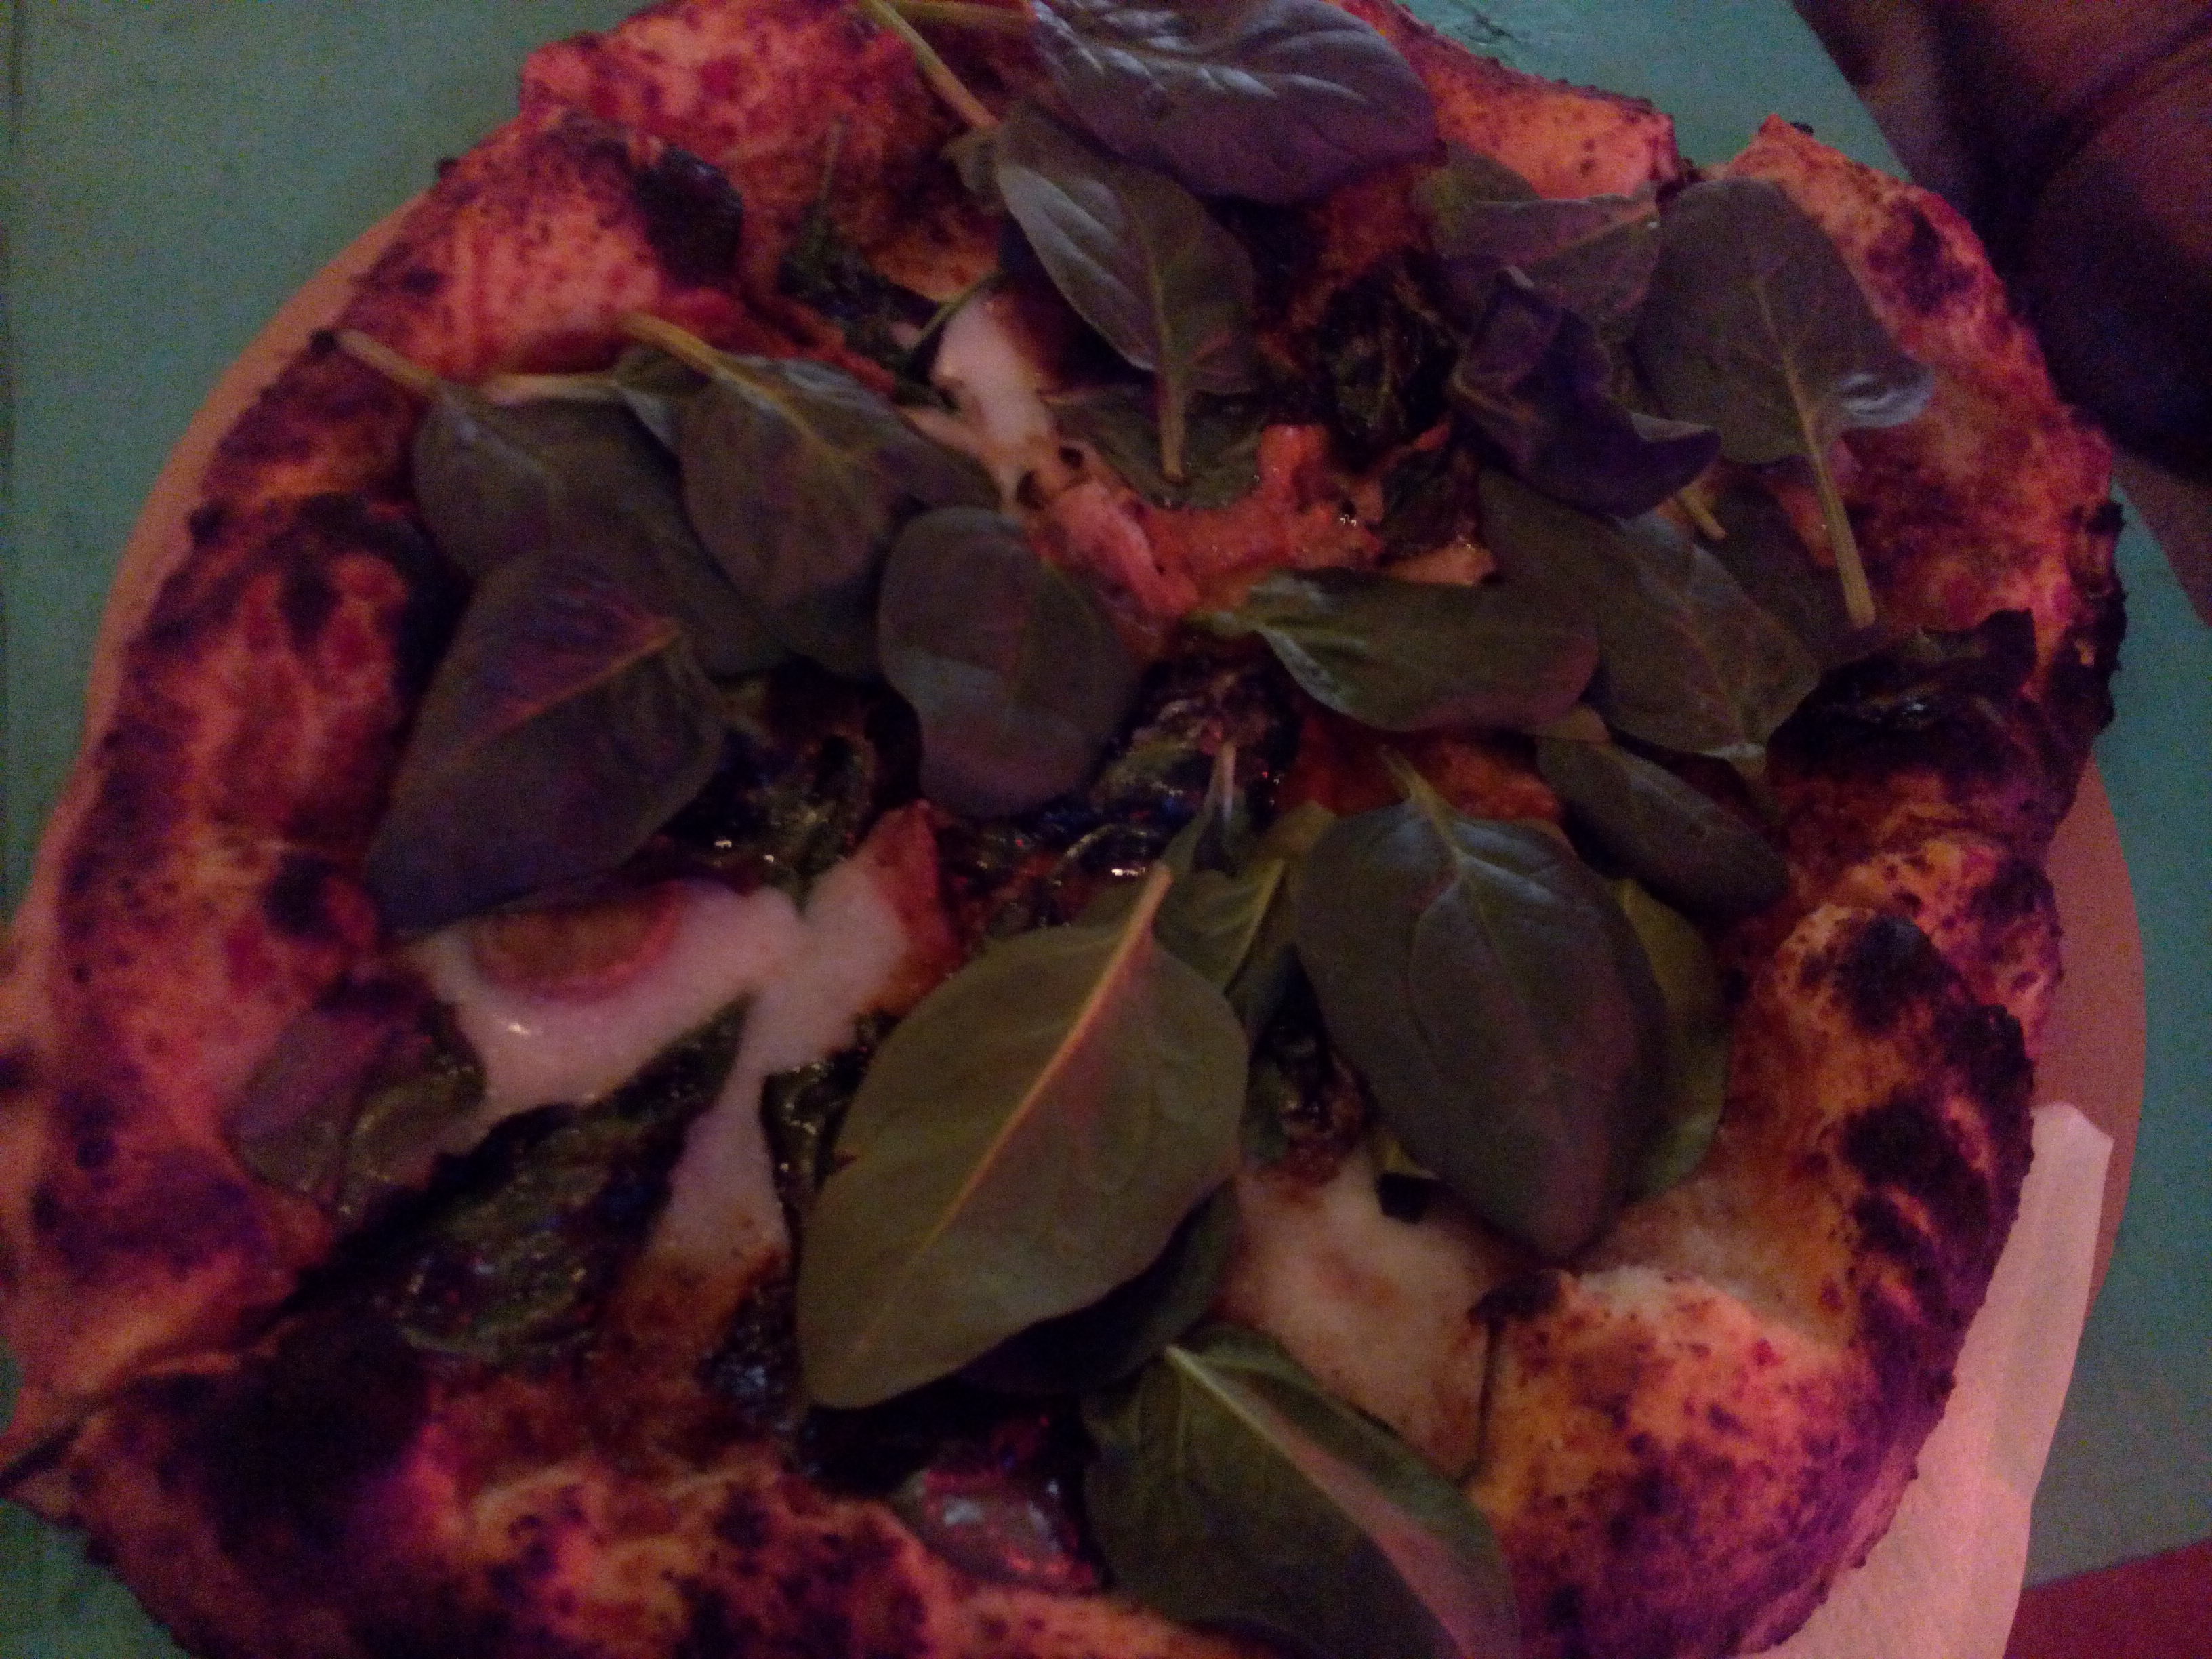 Dimly lit pizza with leaves on